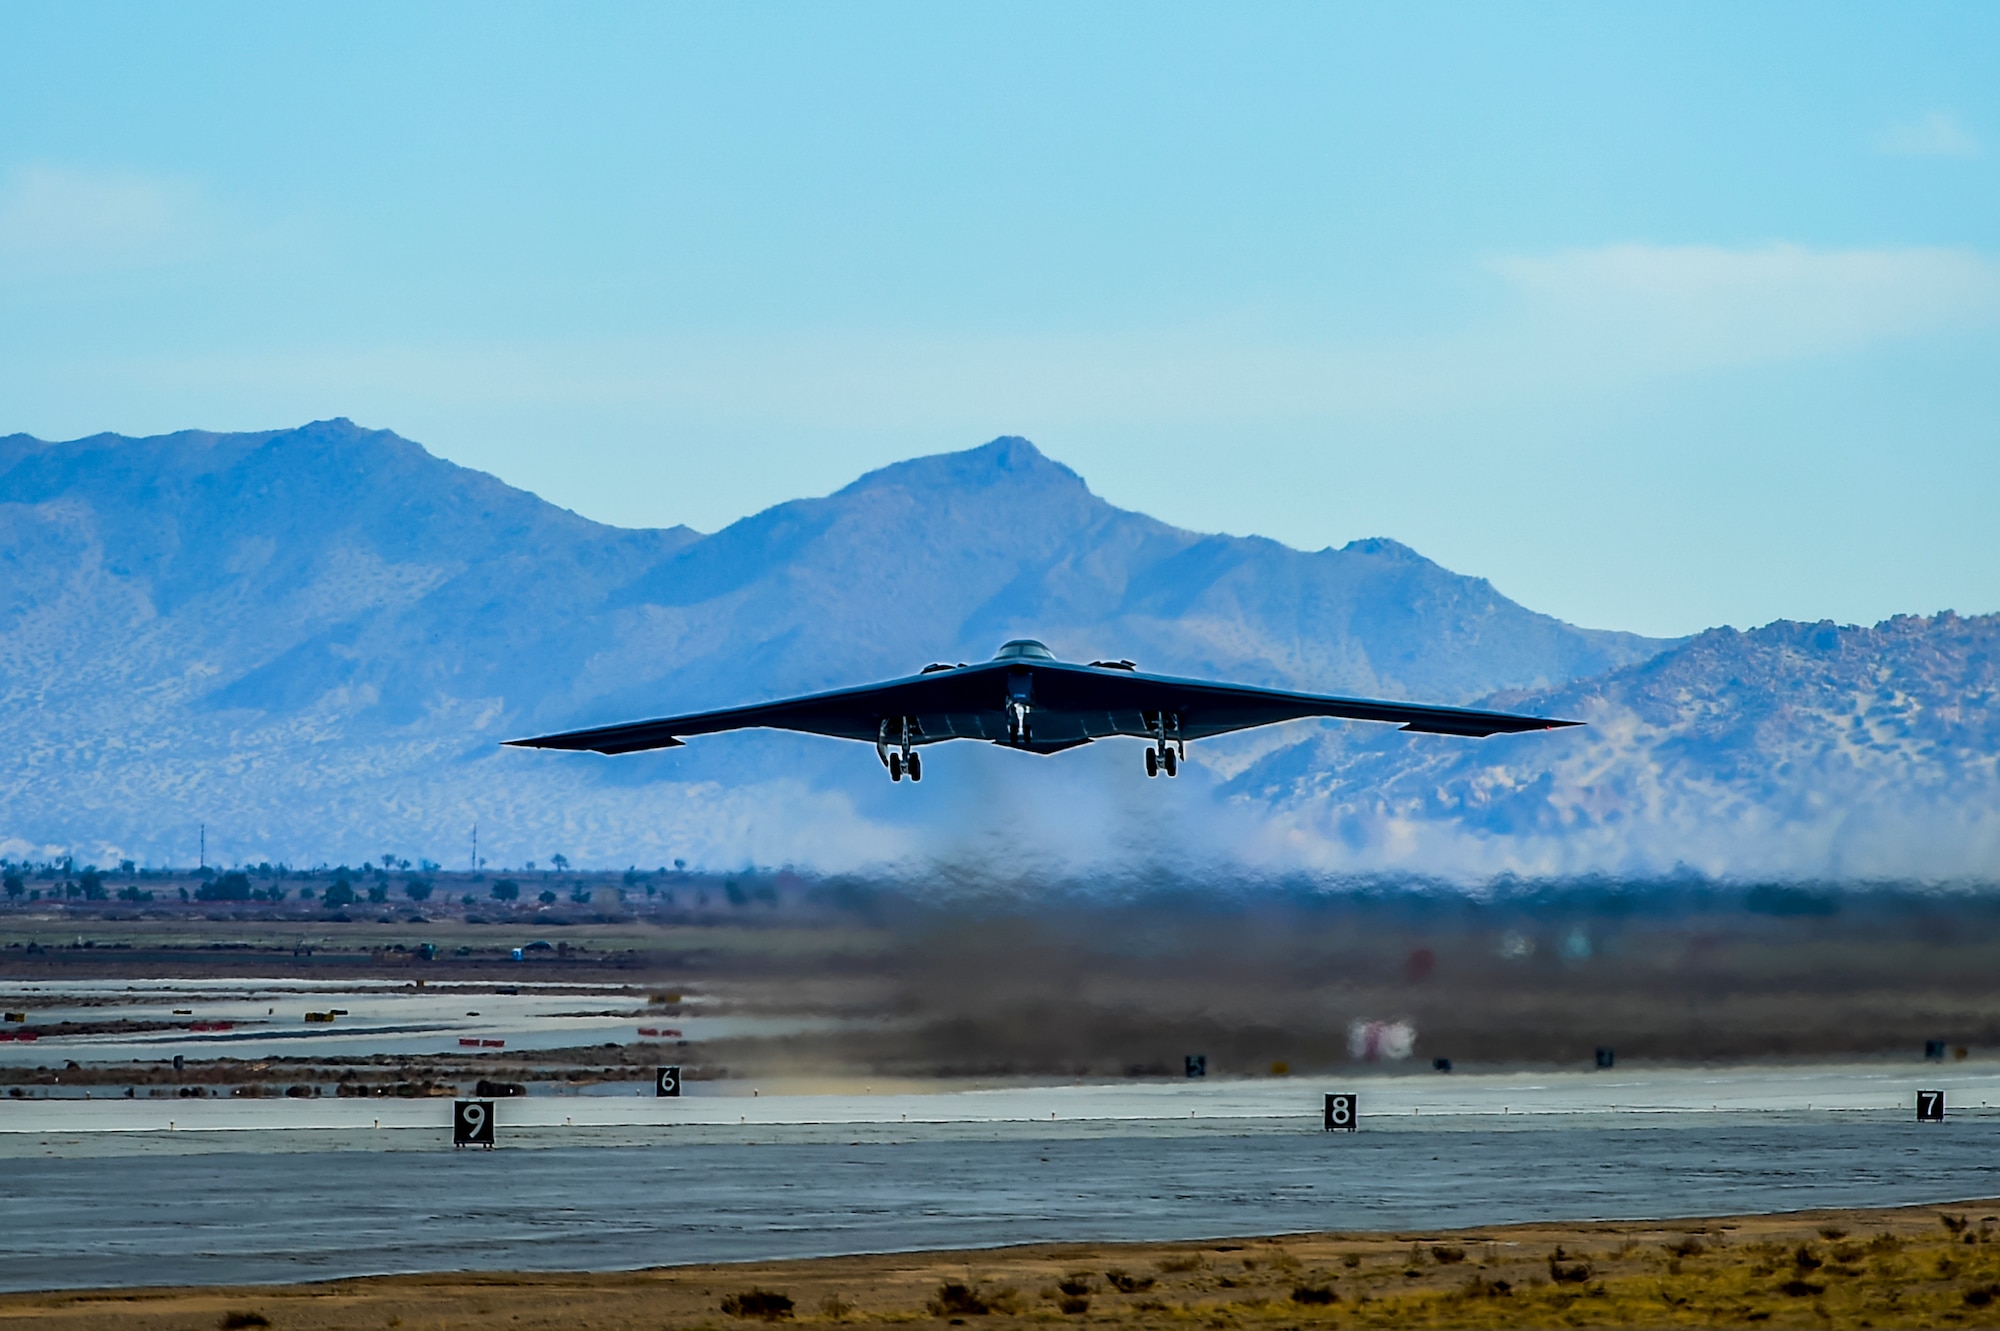 A B-2 Spirit stealth bomber takes off from Plant 42 in Palmdale, California, April 12, 2019. The Air Force’s B-2 fleet undergoes undergo programmed depot maintenance every nine years at the Northrop Grumman facility at Plant 42. (Photo courtesy of Alan Radecki/Northrop Grumman)